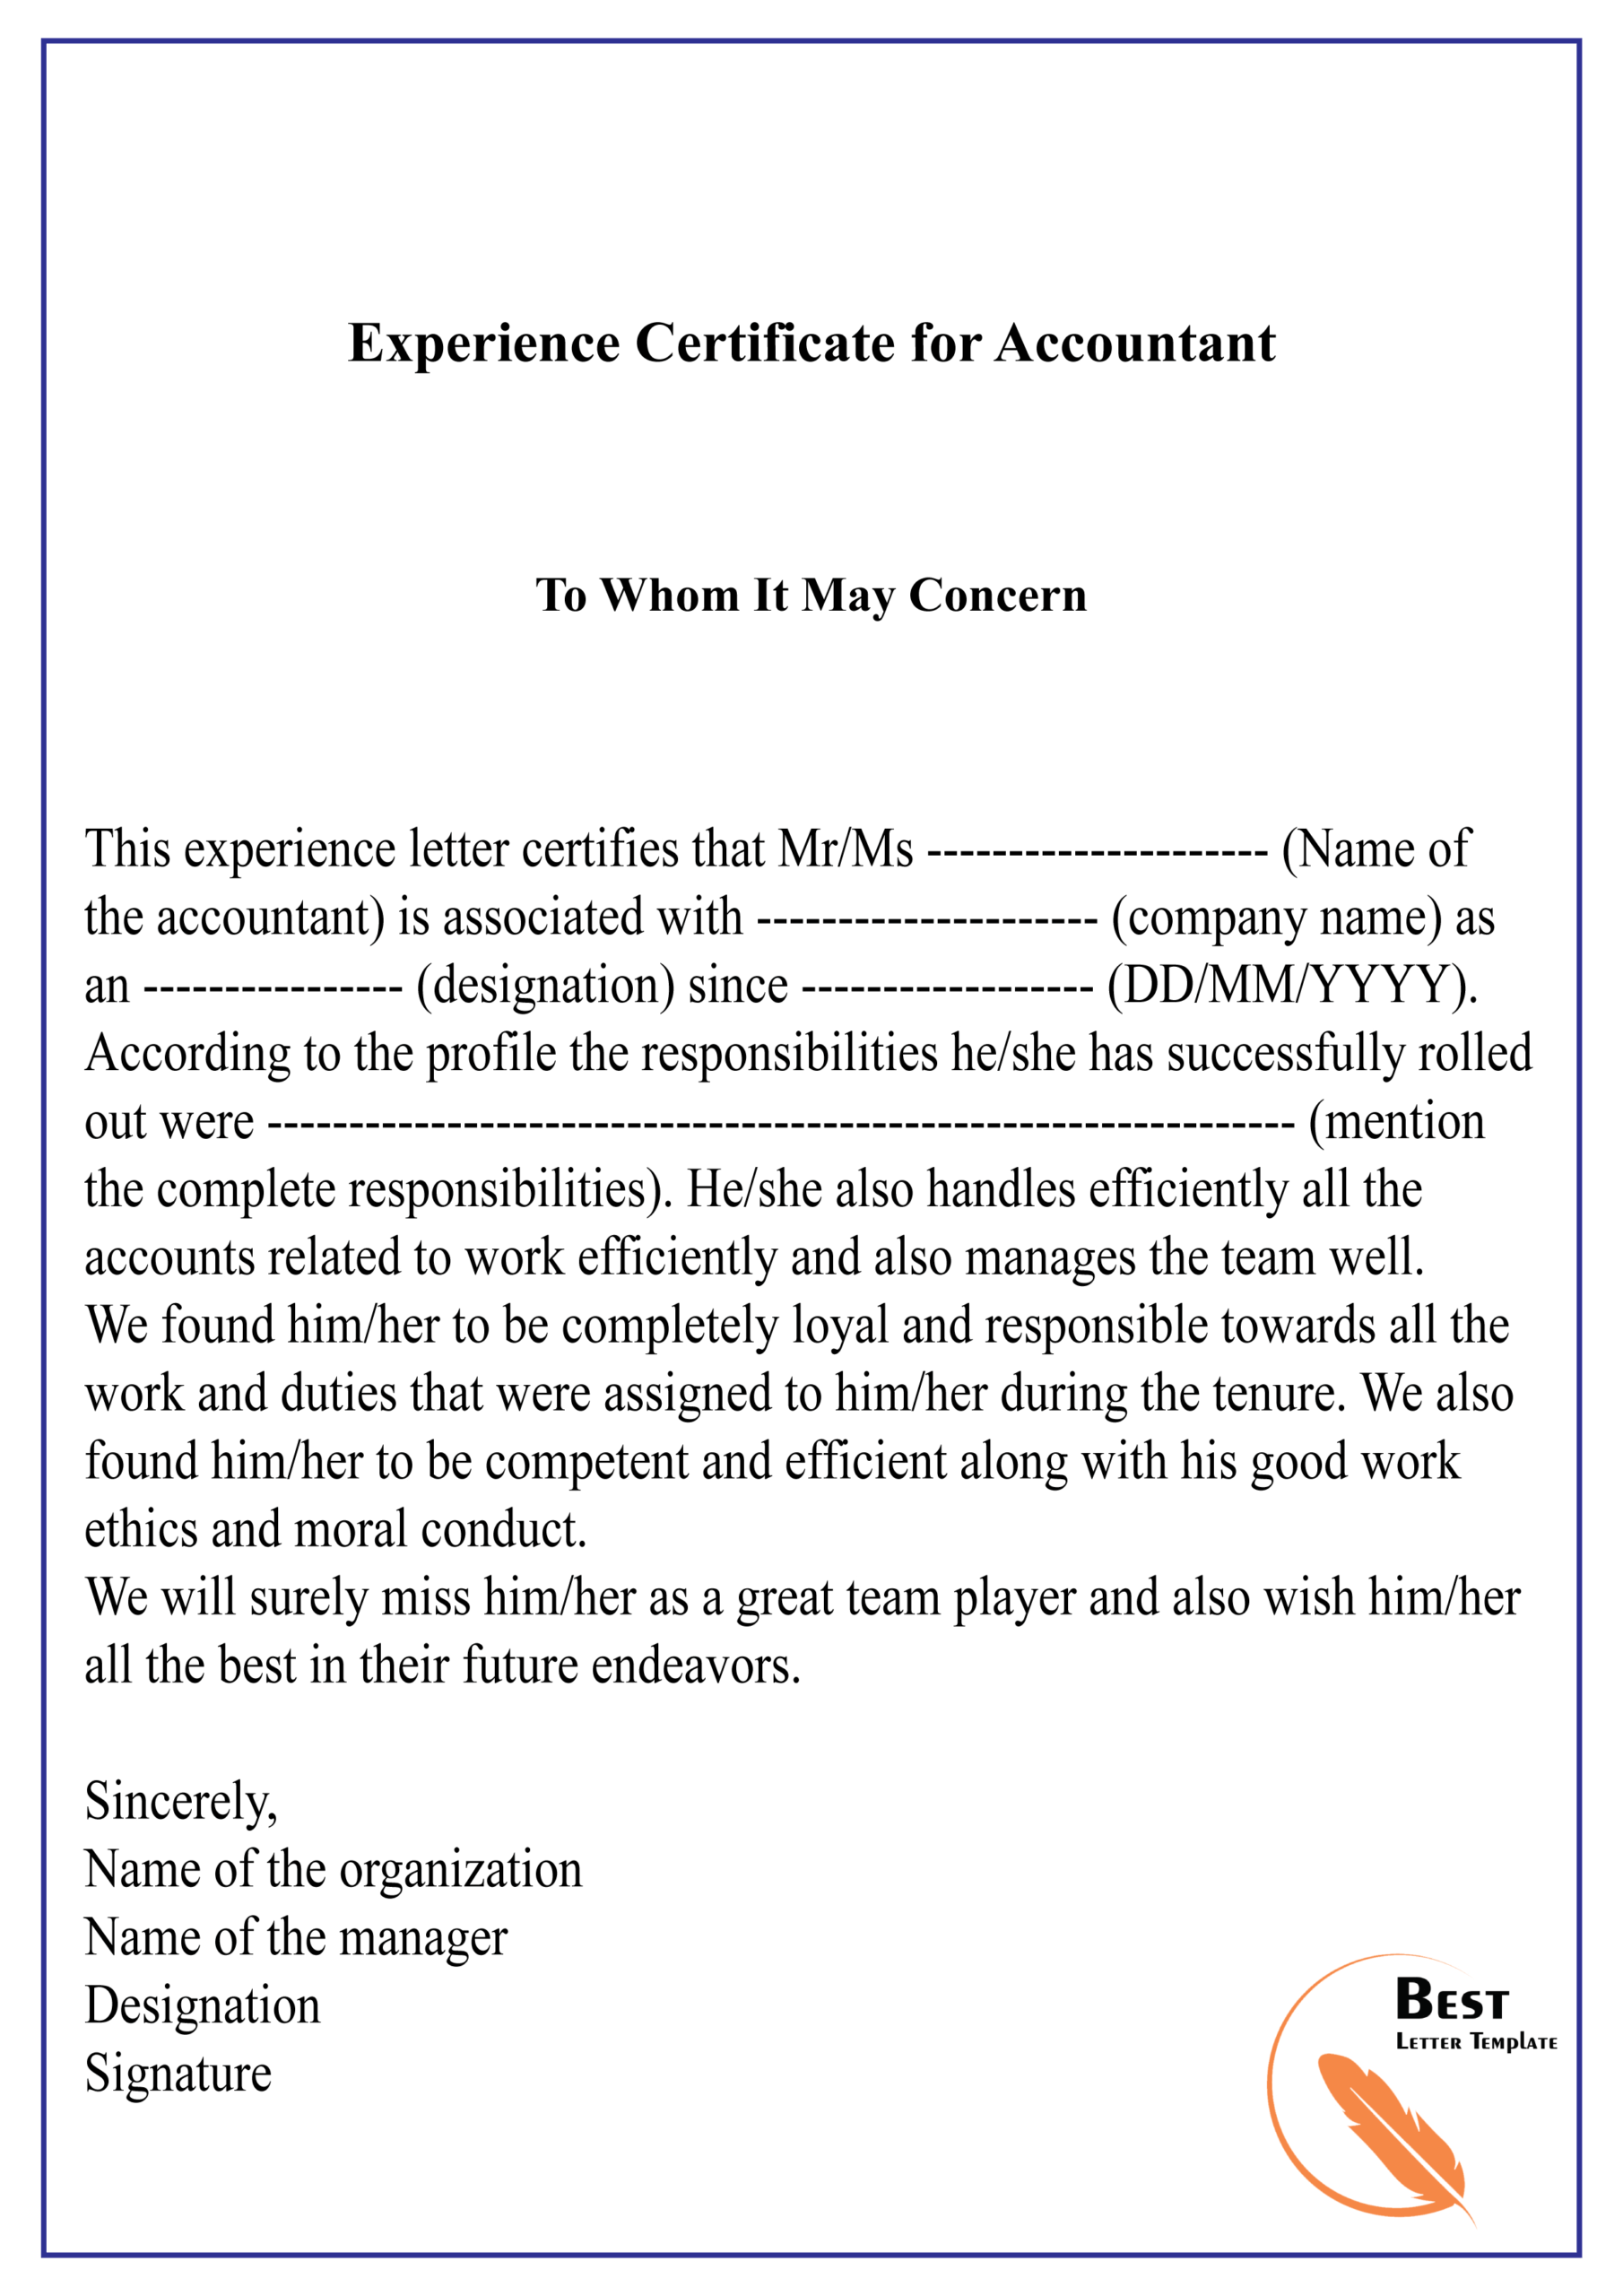 Experience Certificate For Accountant 01 | Best Letter Template With Regard To Template Of Experience Certificate